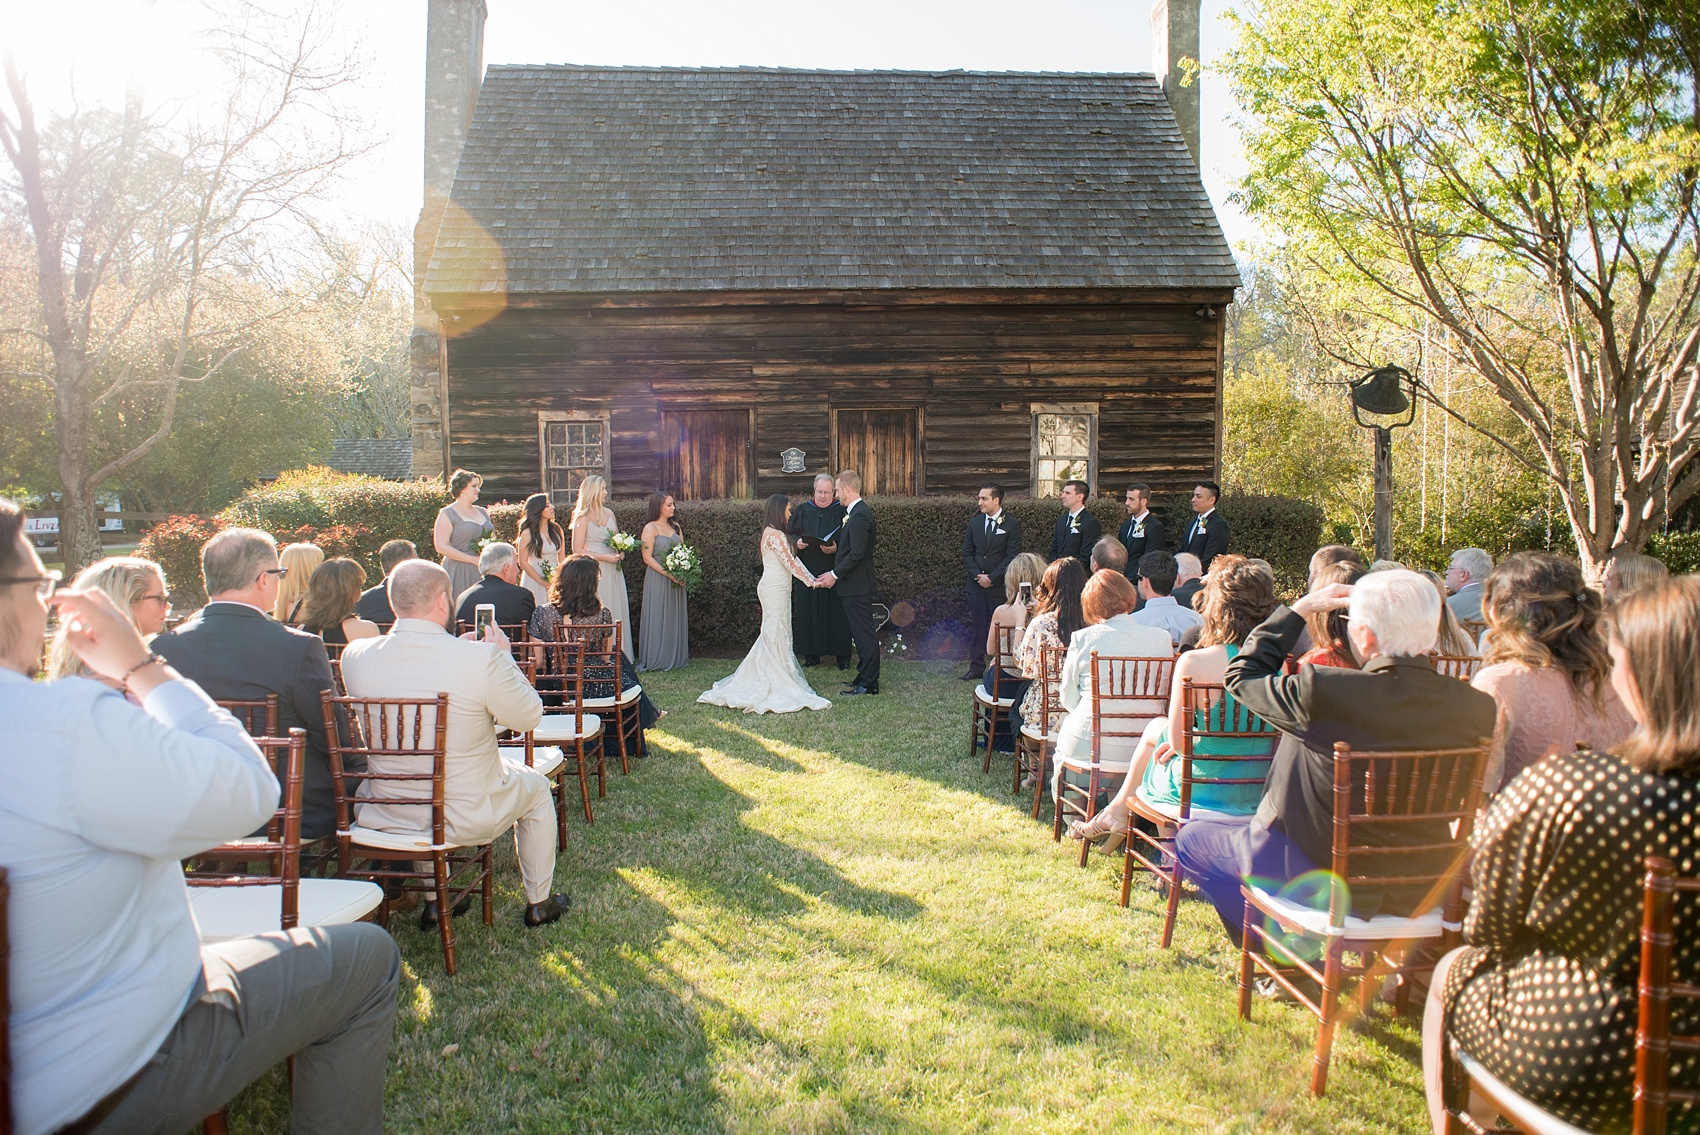 The Sutherland Wedding Photos by Mikkel Paige Photography. A simple outdoor ceremony in front of a rustic barn. Planning by A Southern Soiree.